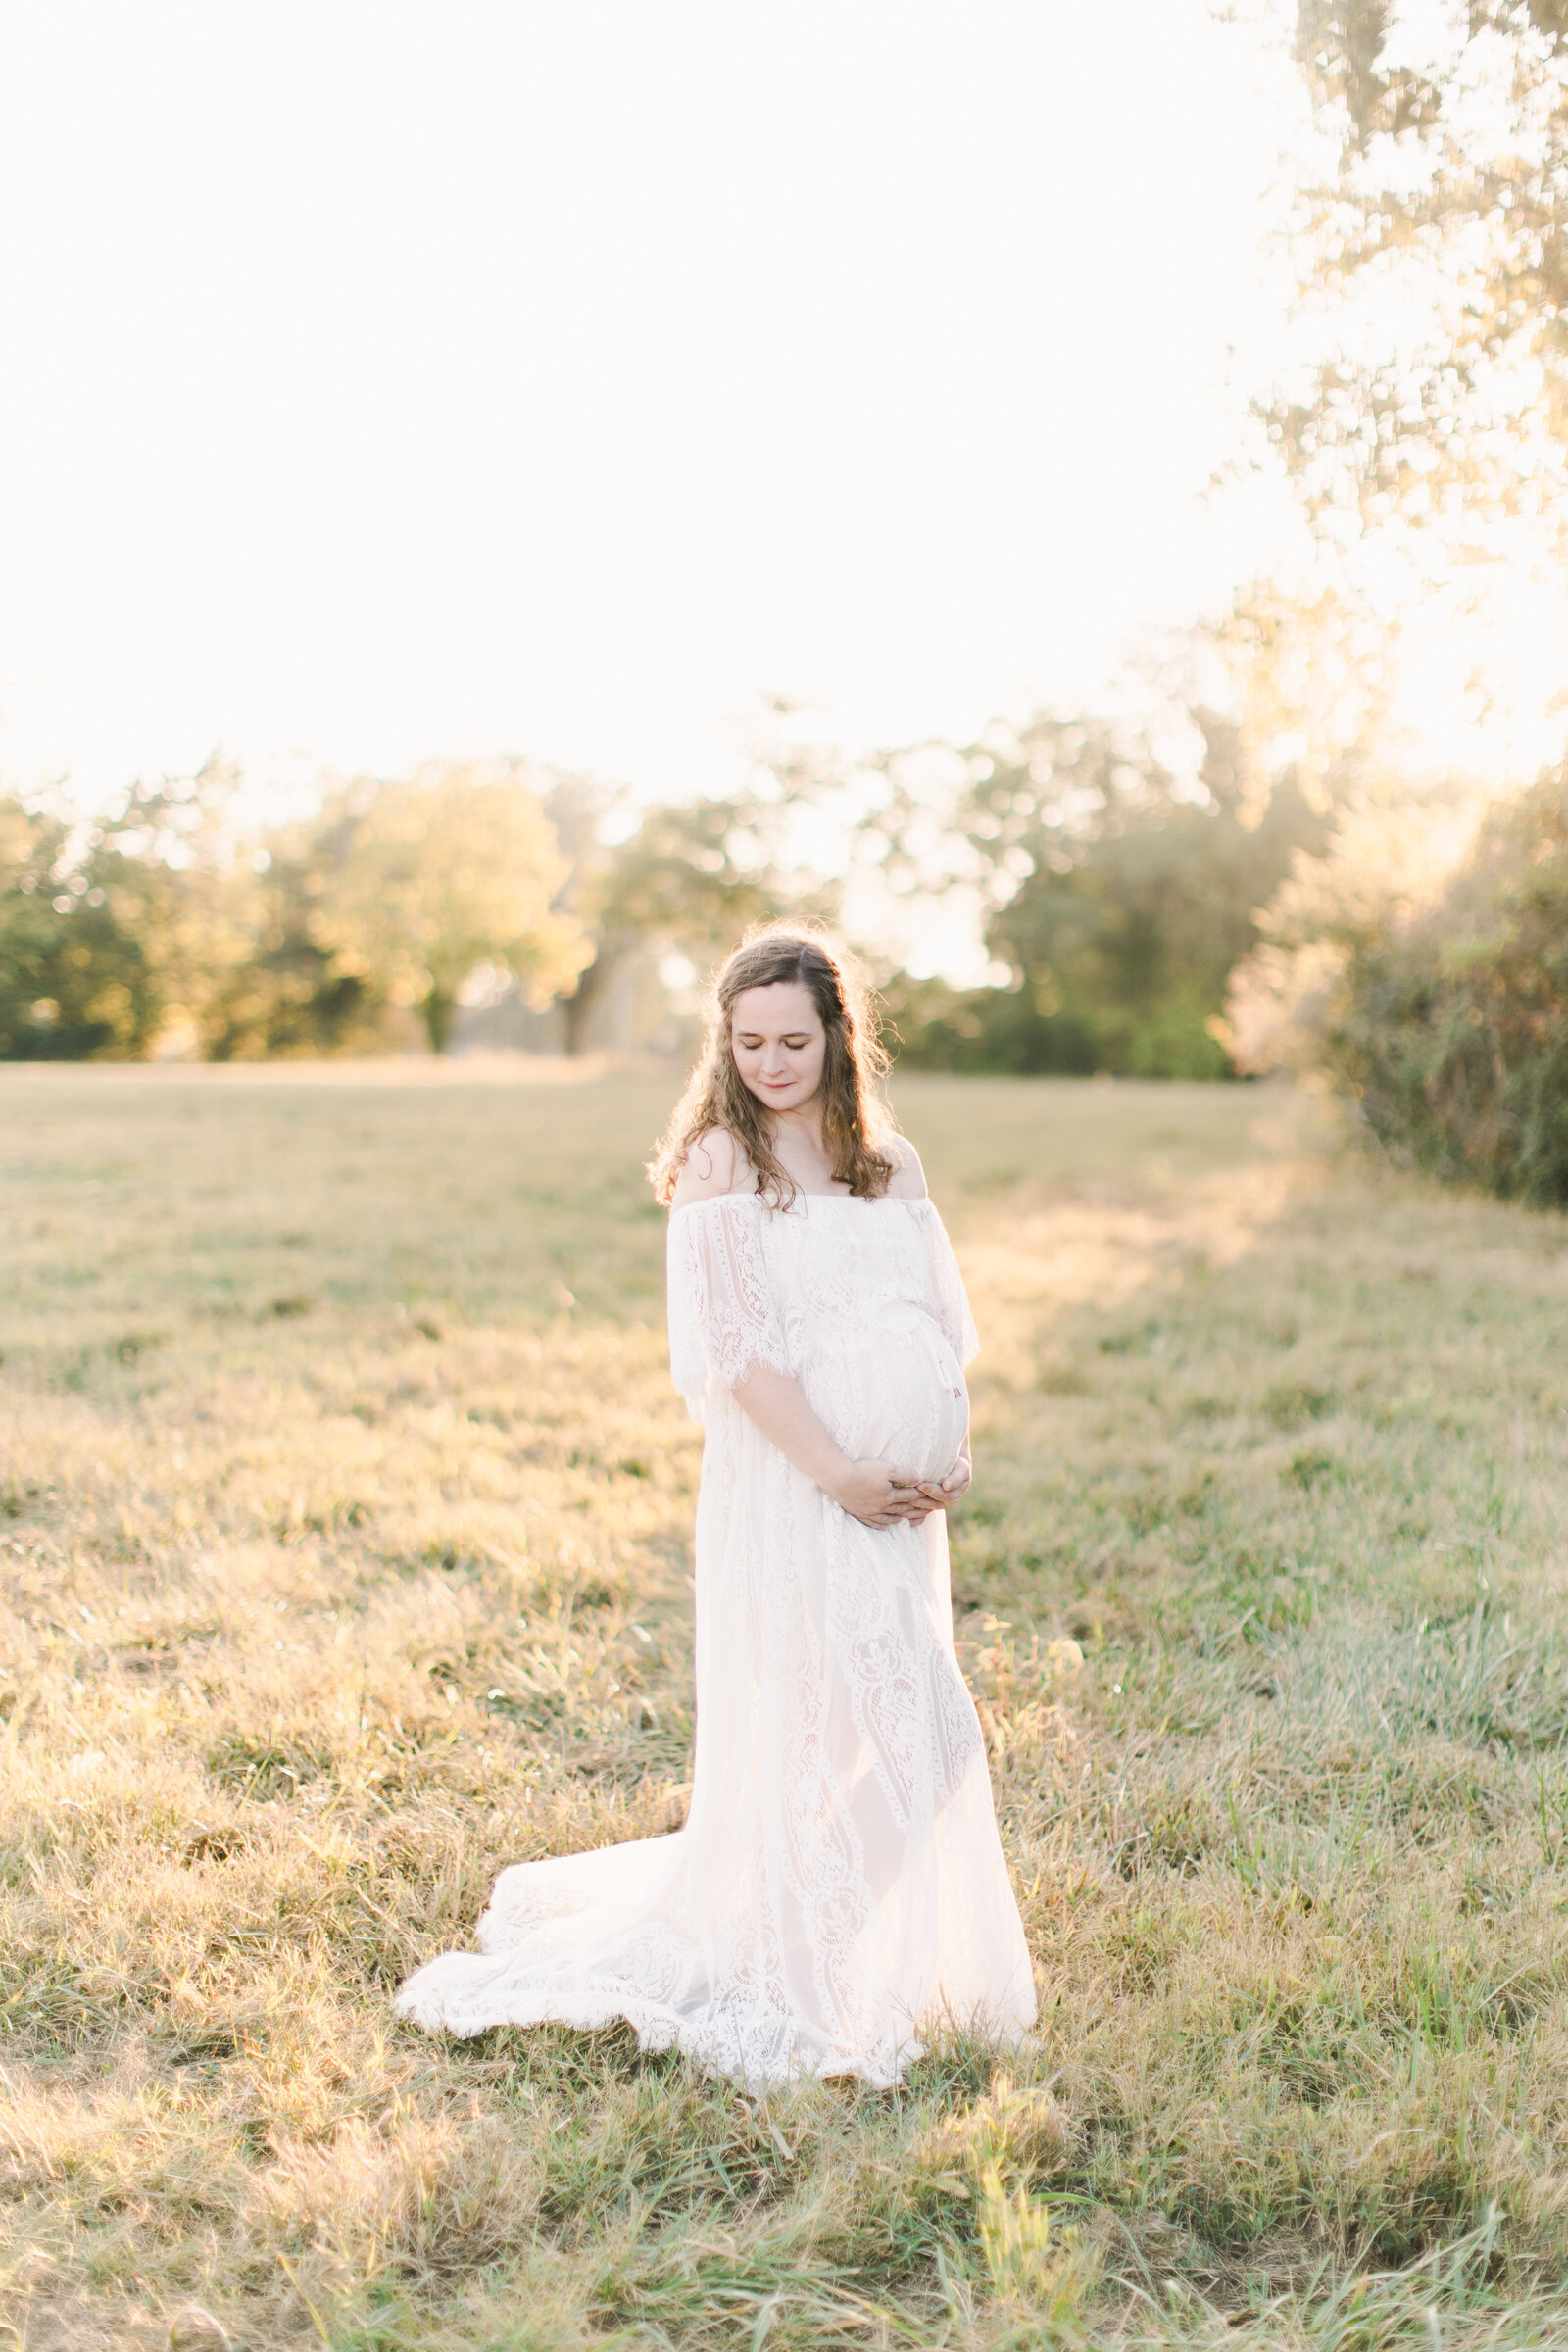 Mom in white dress in her field maternity photo shoot.